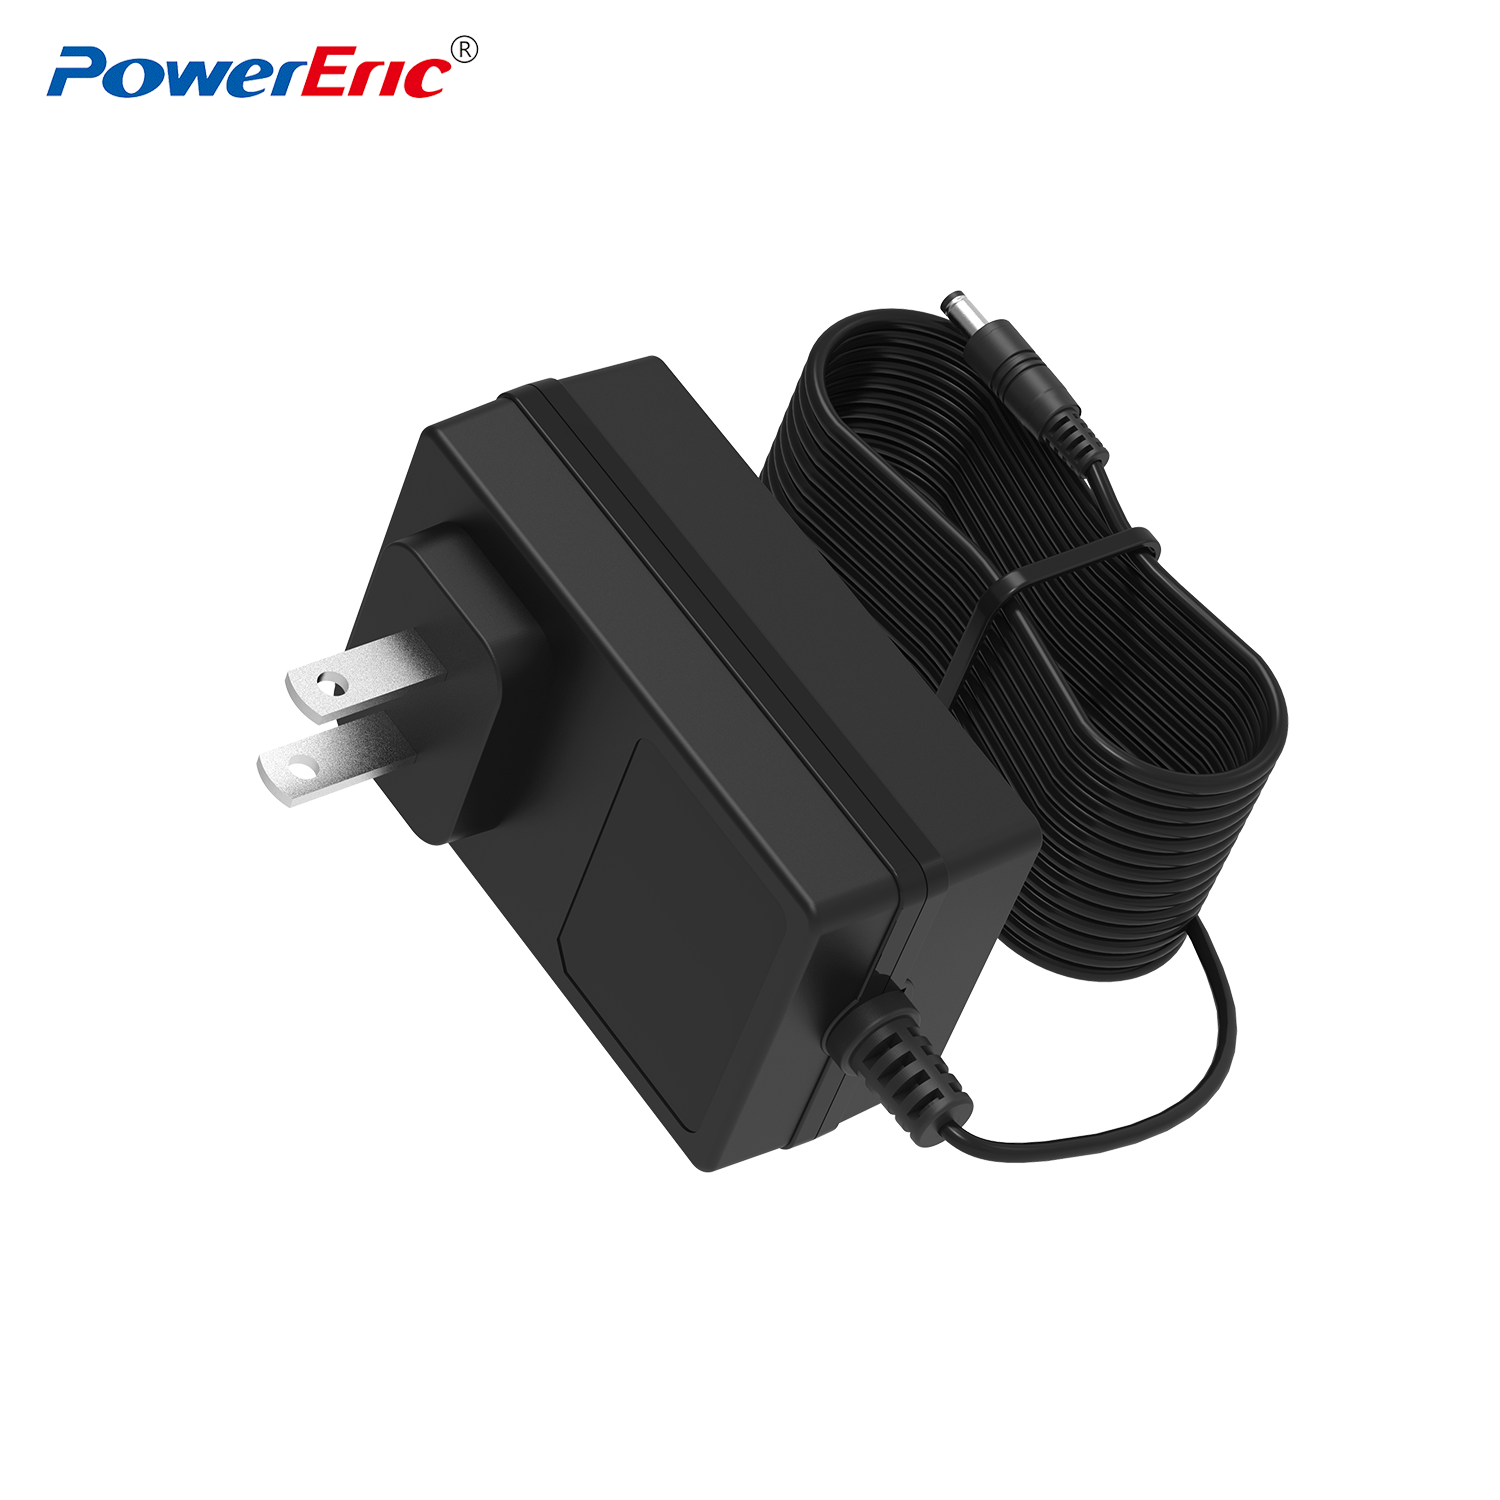 CH0251 battery charger with horizental wall mount type